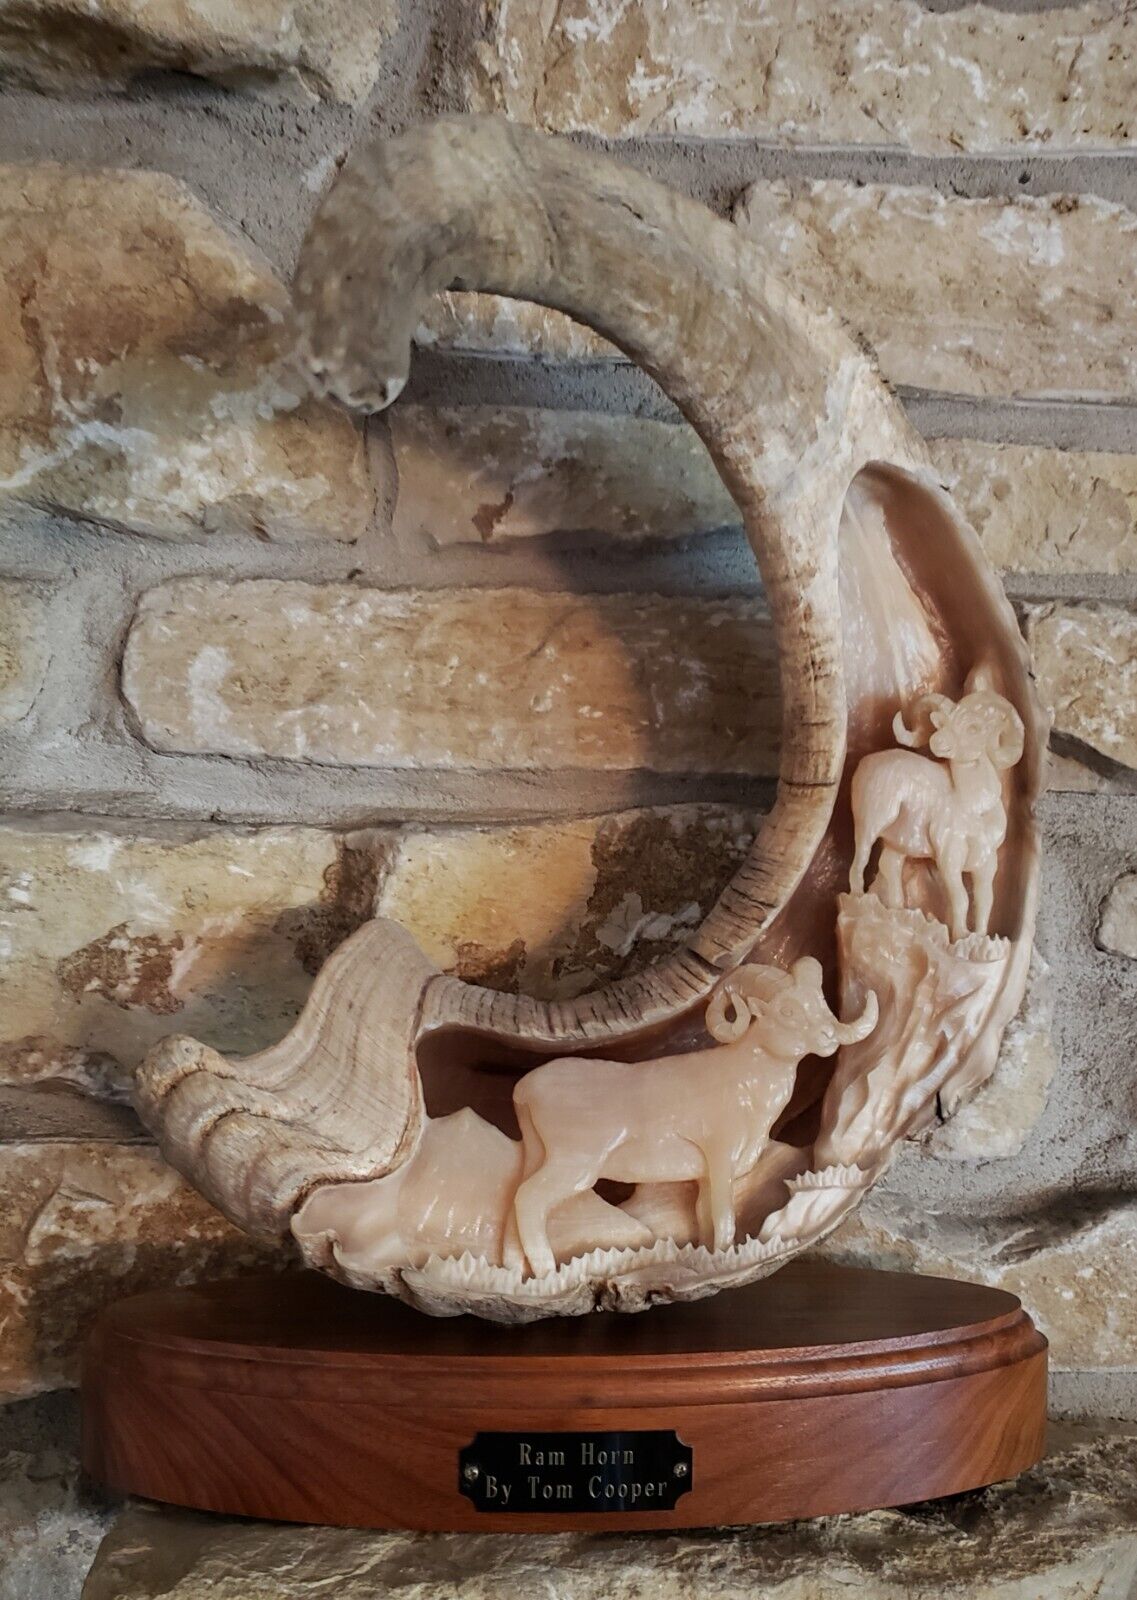 HAND CARVED RAM HORN BY TOM COOPER